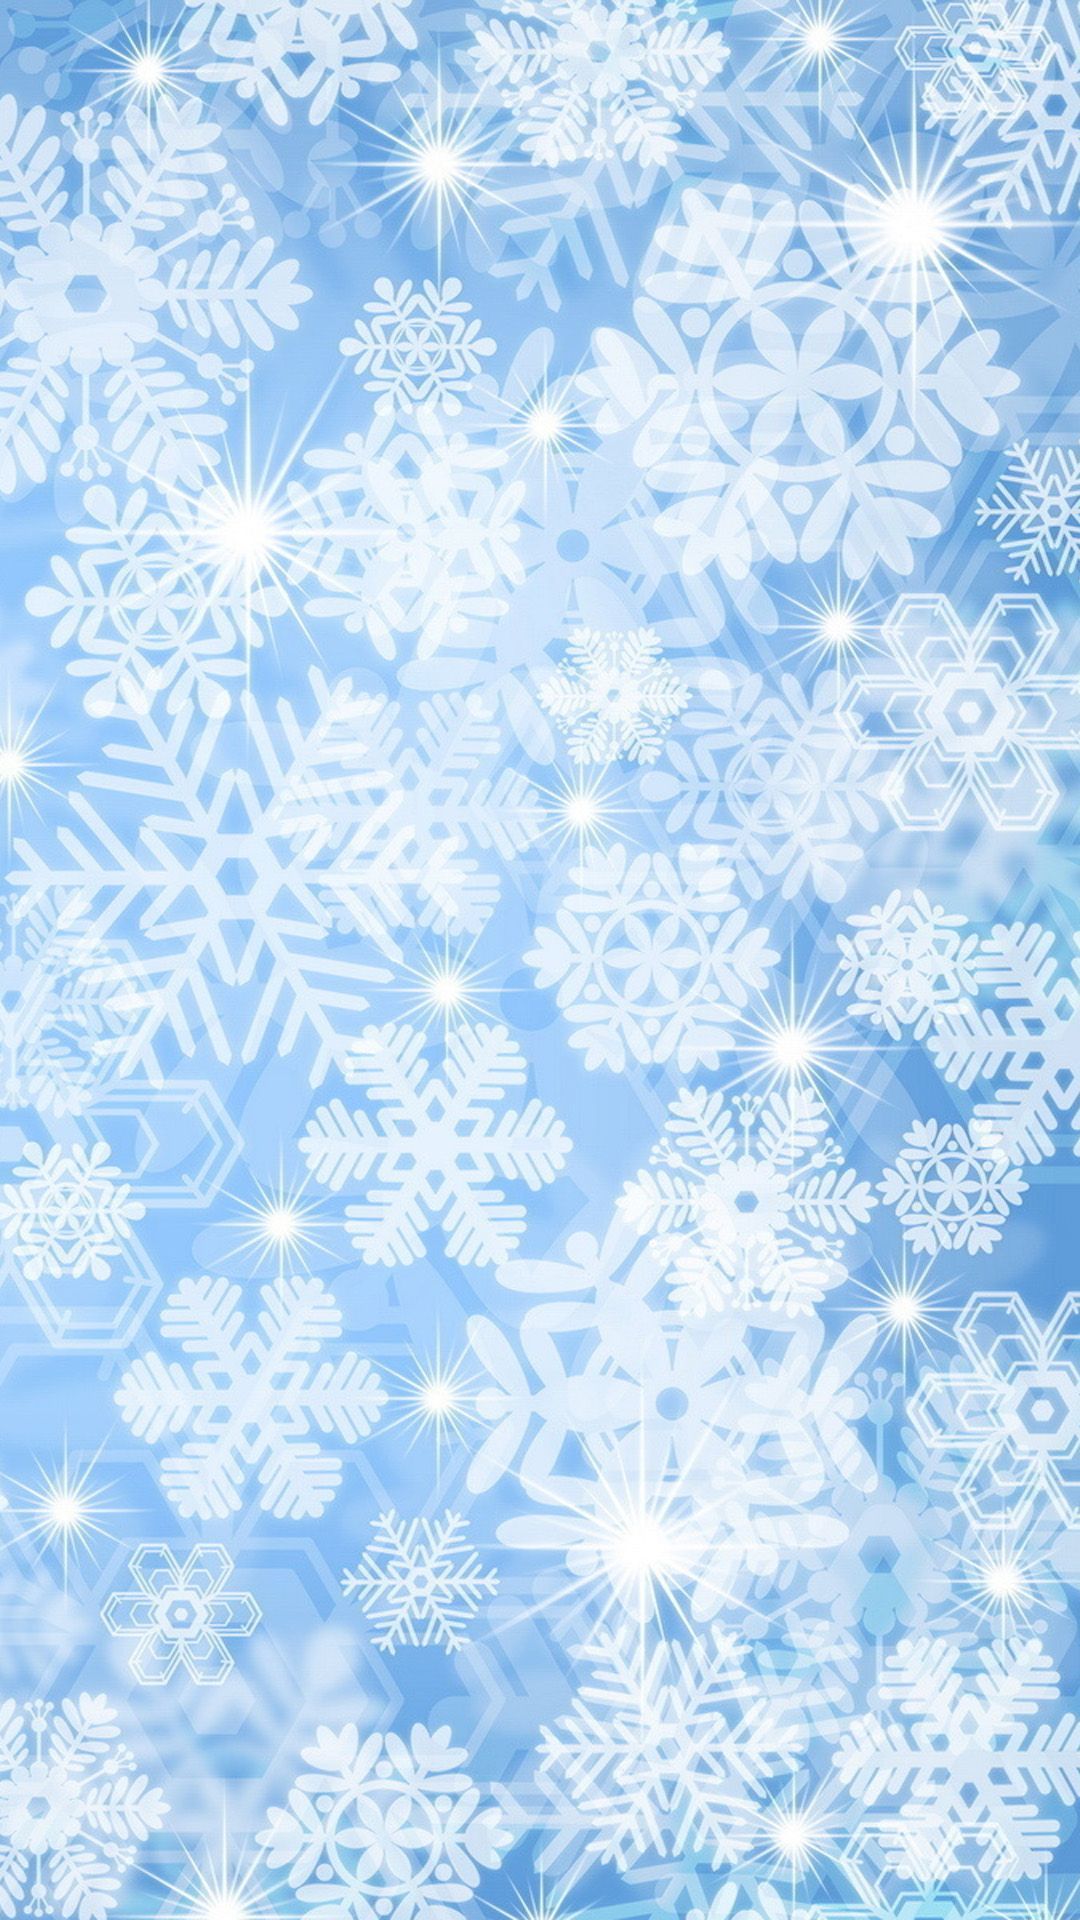 A blue background with snowflakes - Snowflake